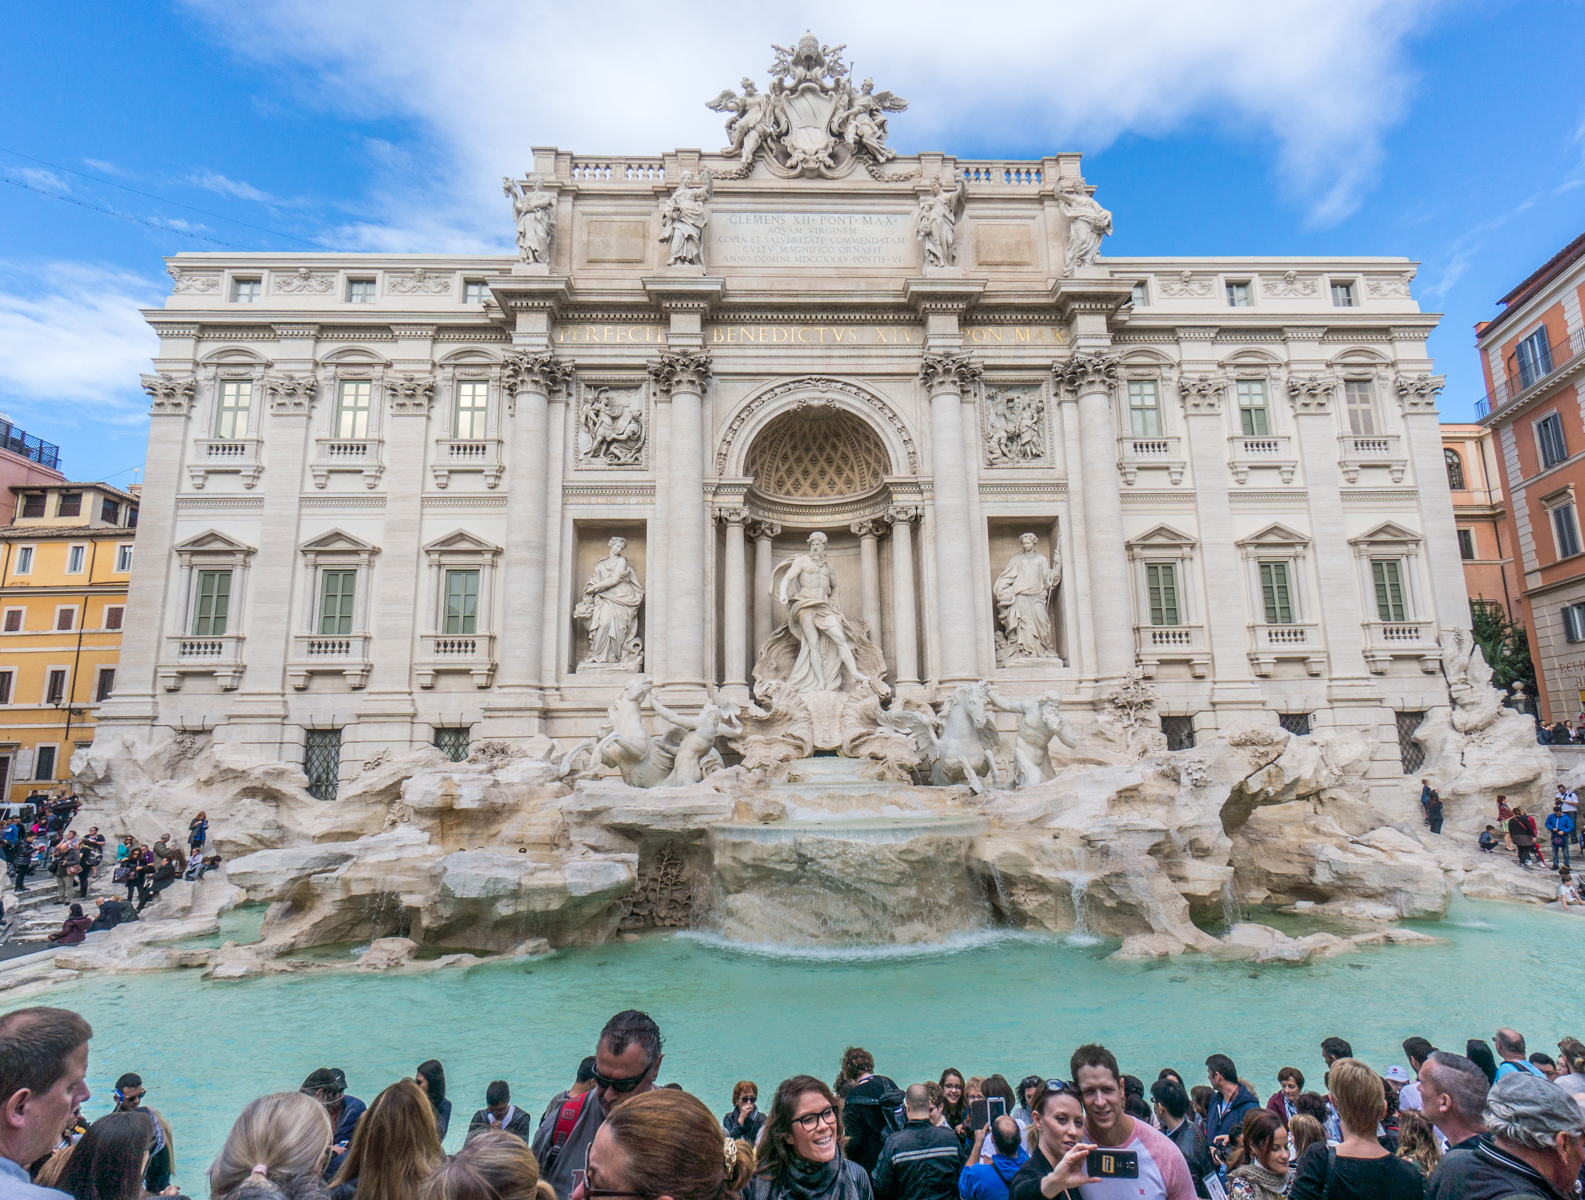 Tourists pose for selfies in front of Rome's Trevi Fountain | Photo by Mike Hudak